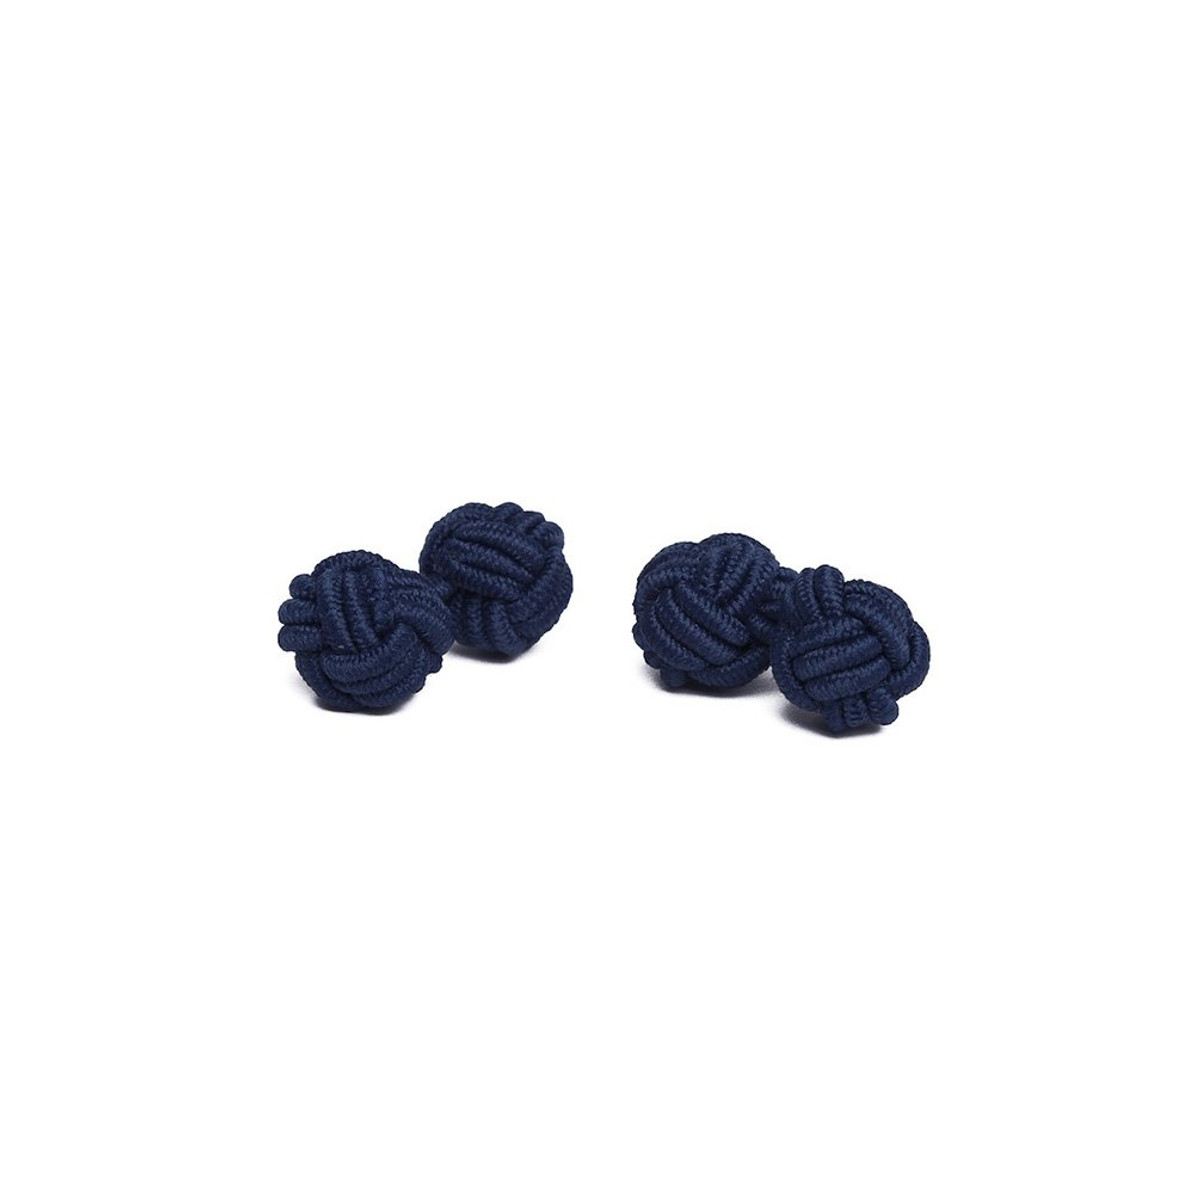 Pair of Solid Color Silk Knot Cufflinks - Navy Blue